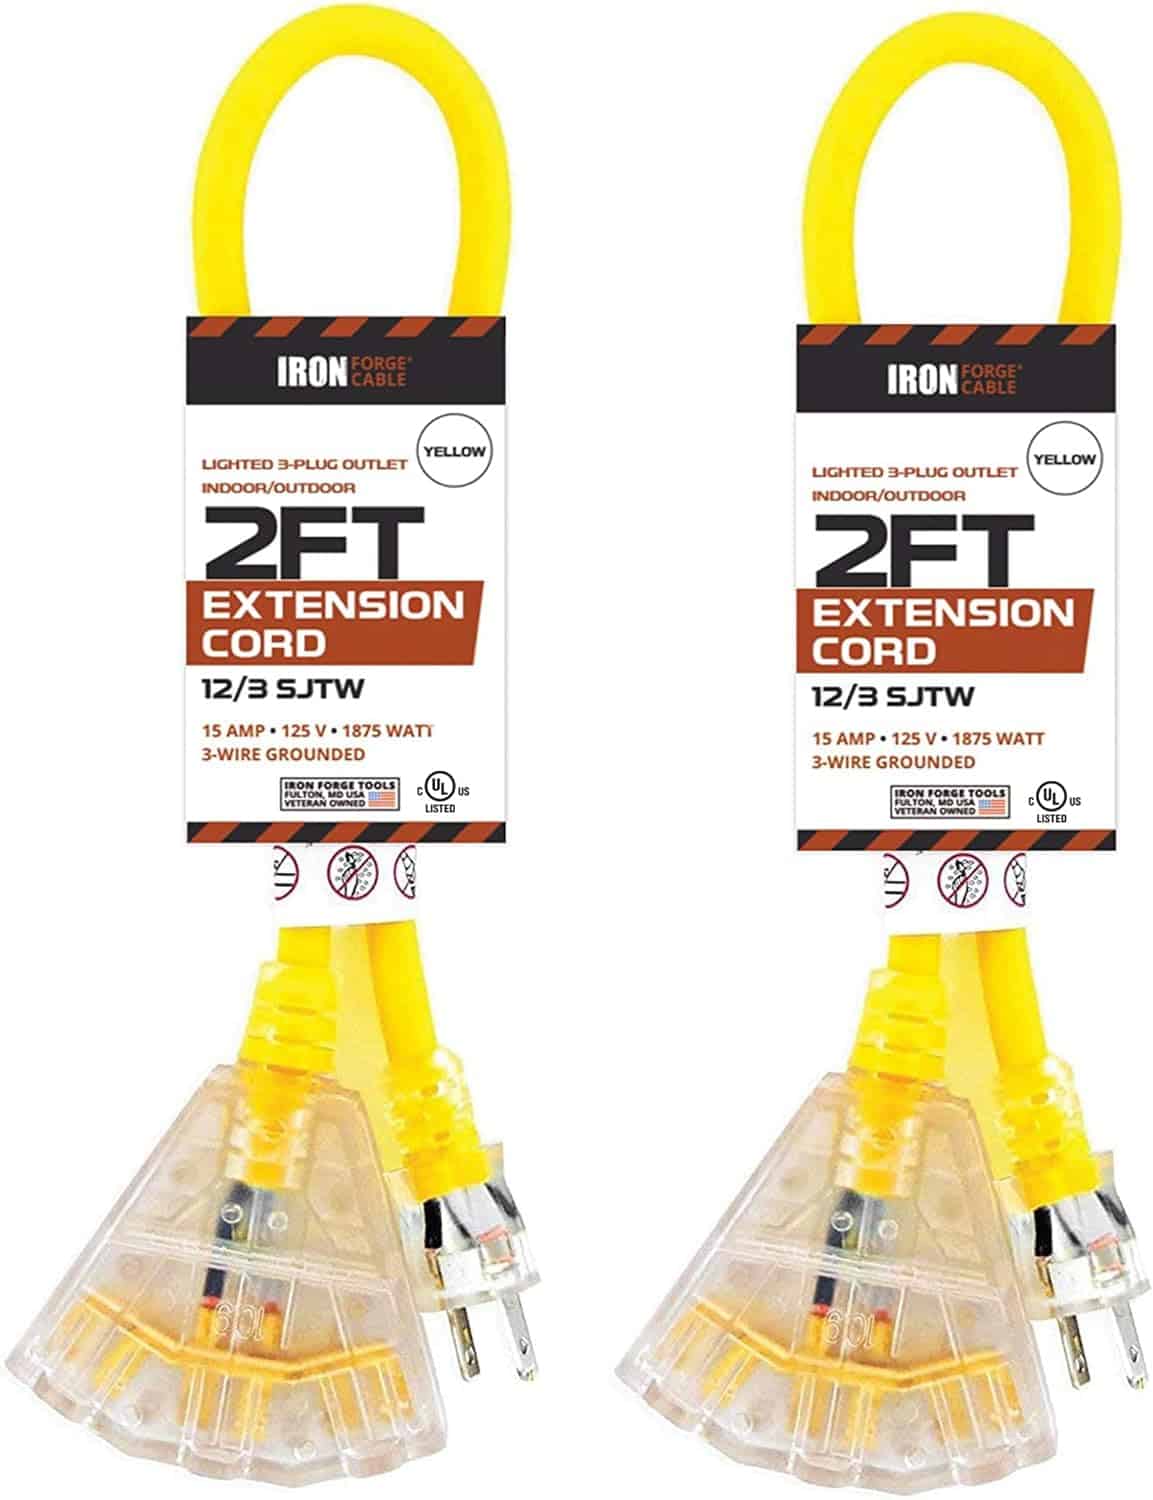 IRON-FORGE-2-Pack-of-2-ft-Heavy-Duty-Extension-Cord-with-3-Outlets-12-3-Outdoor-Extension-Cord-with-3-Way-Lighted-Outlet-3-Prong-3-Way-Electrical-Plug-12-Gauge-Short-Extension-Cord-Yellow-15-AMP